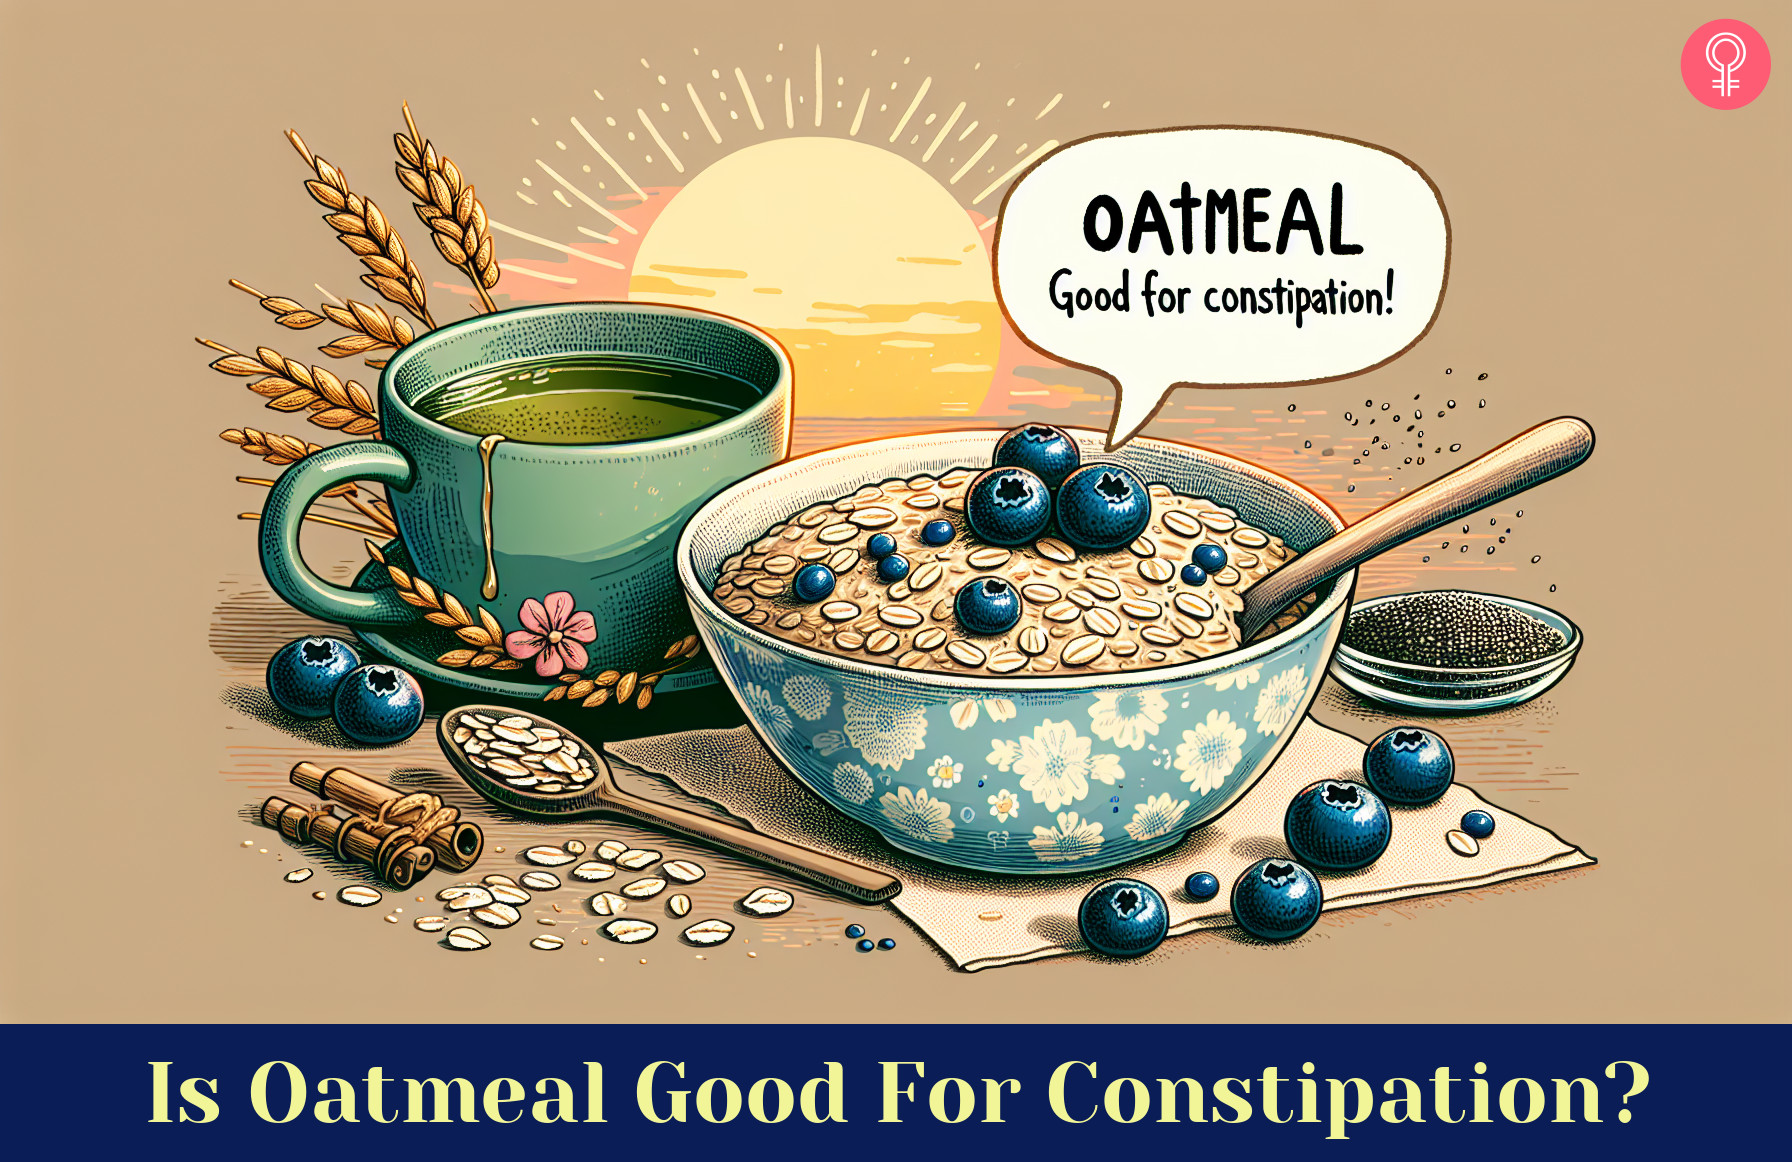 oatmeal good for constipation_illustration